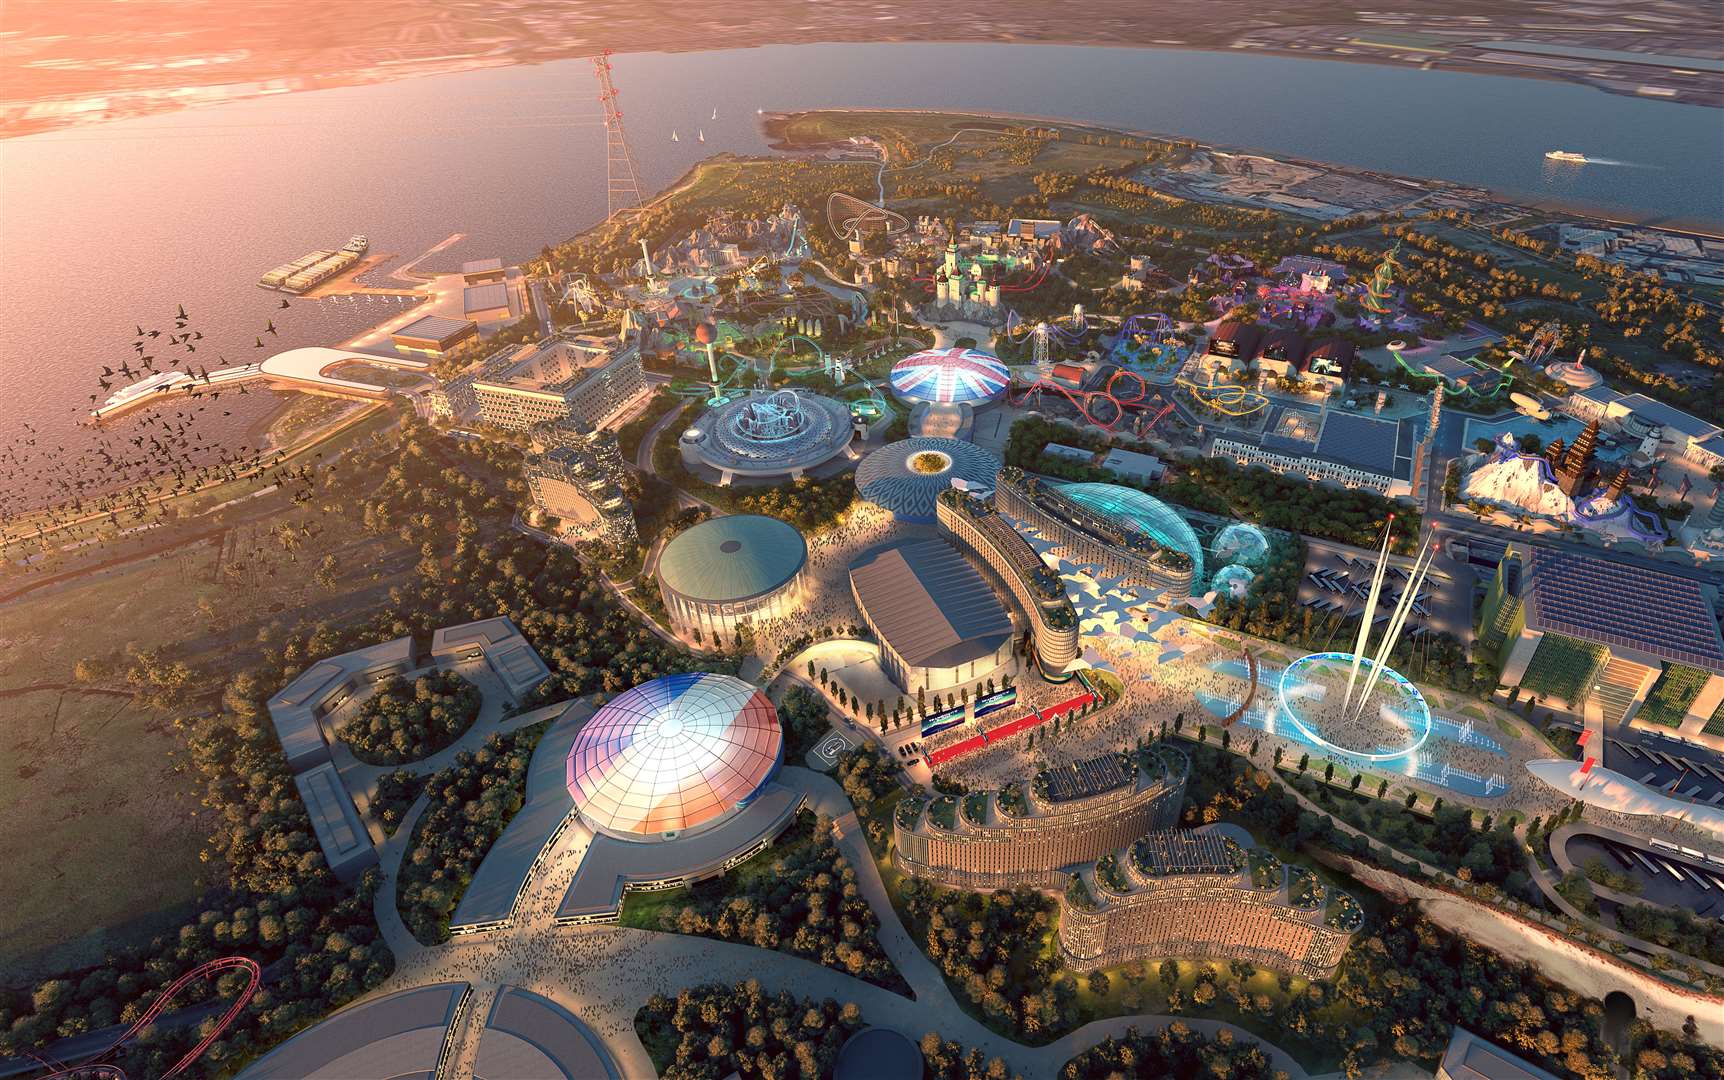 A detailed impression of what the London Resort theme park might look like.